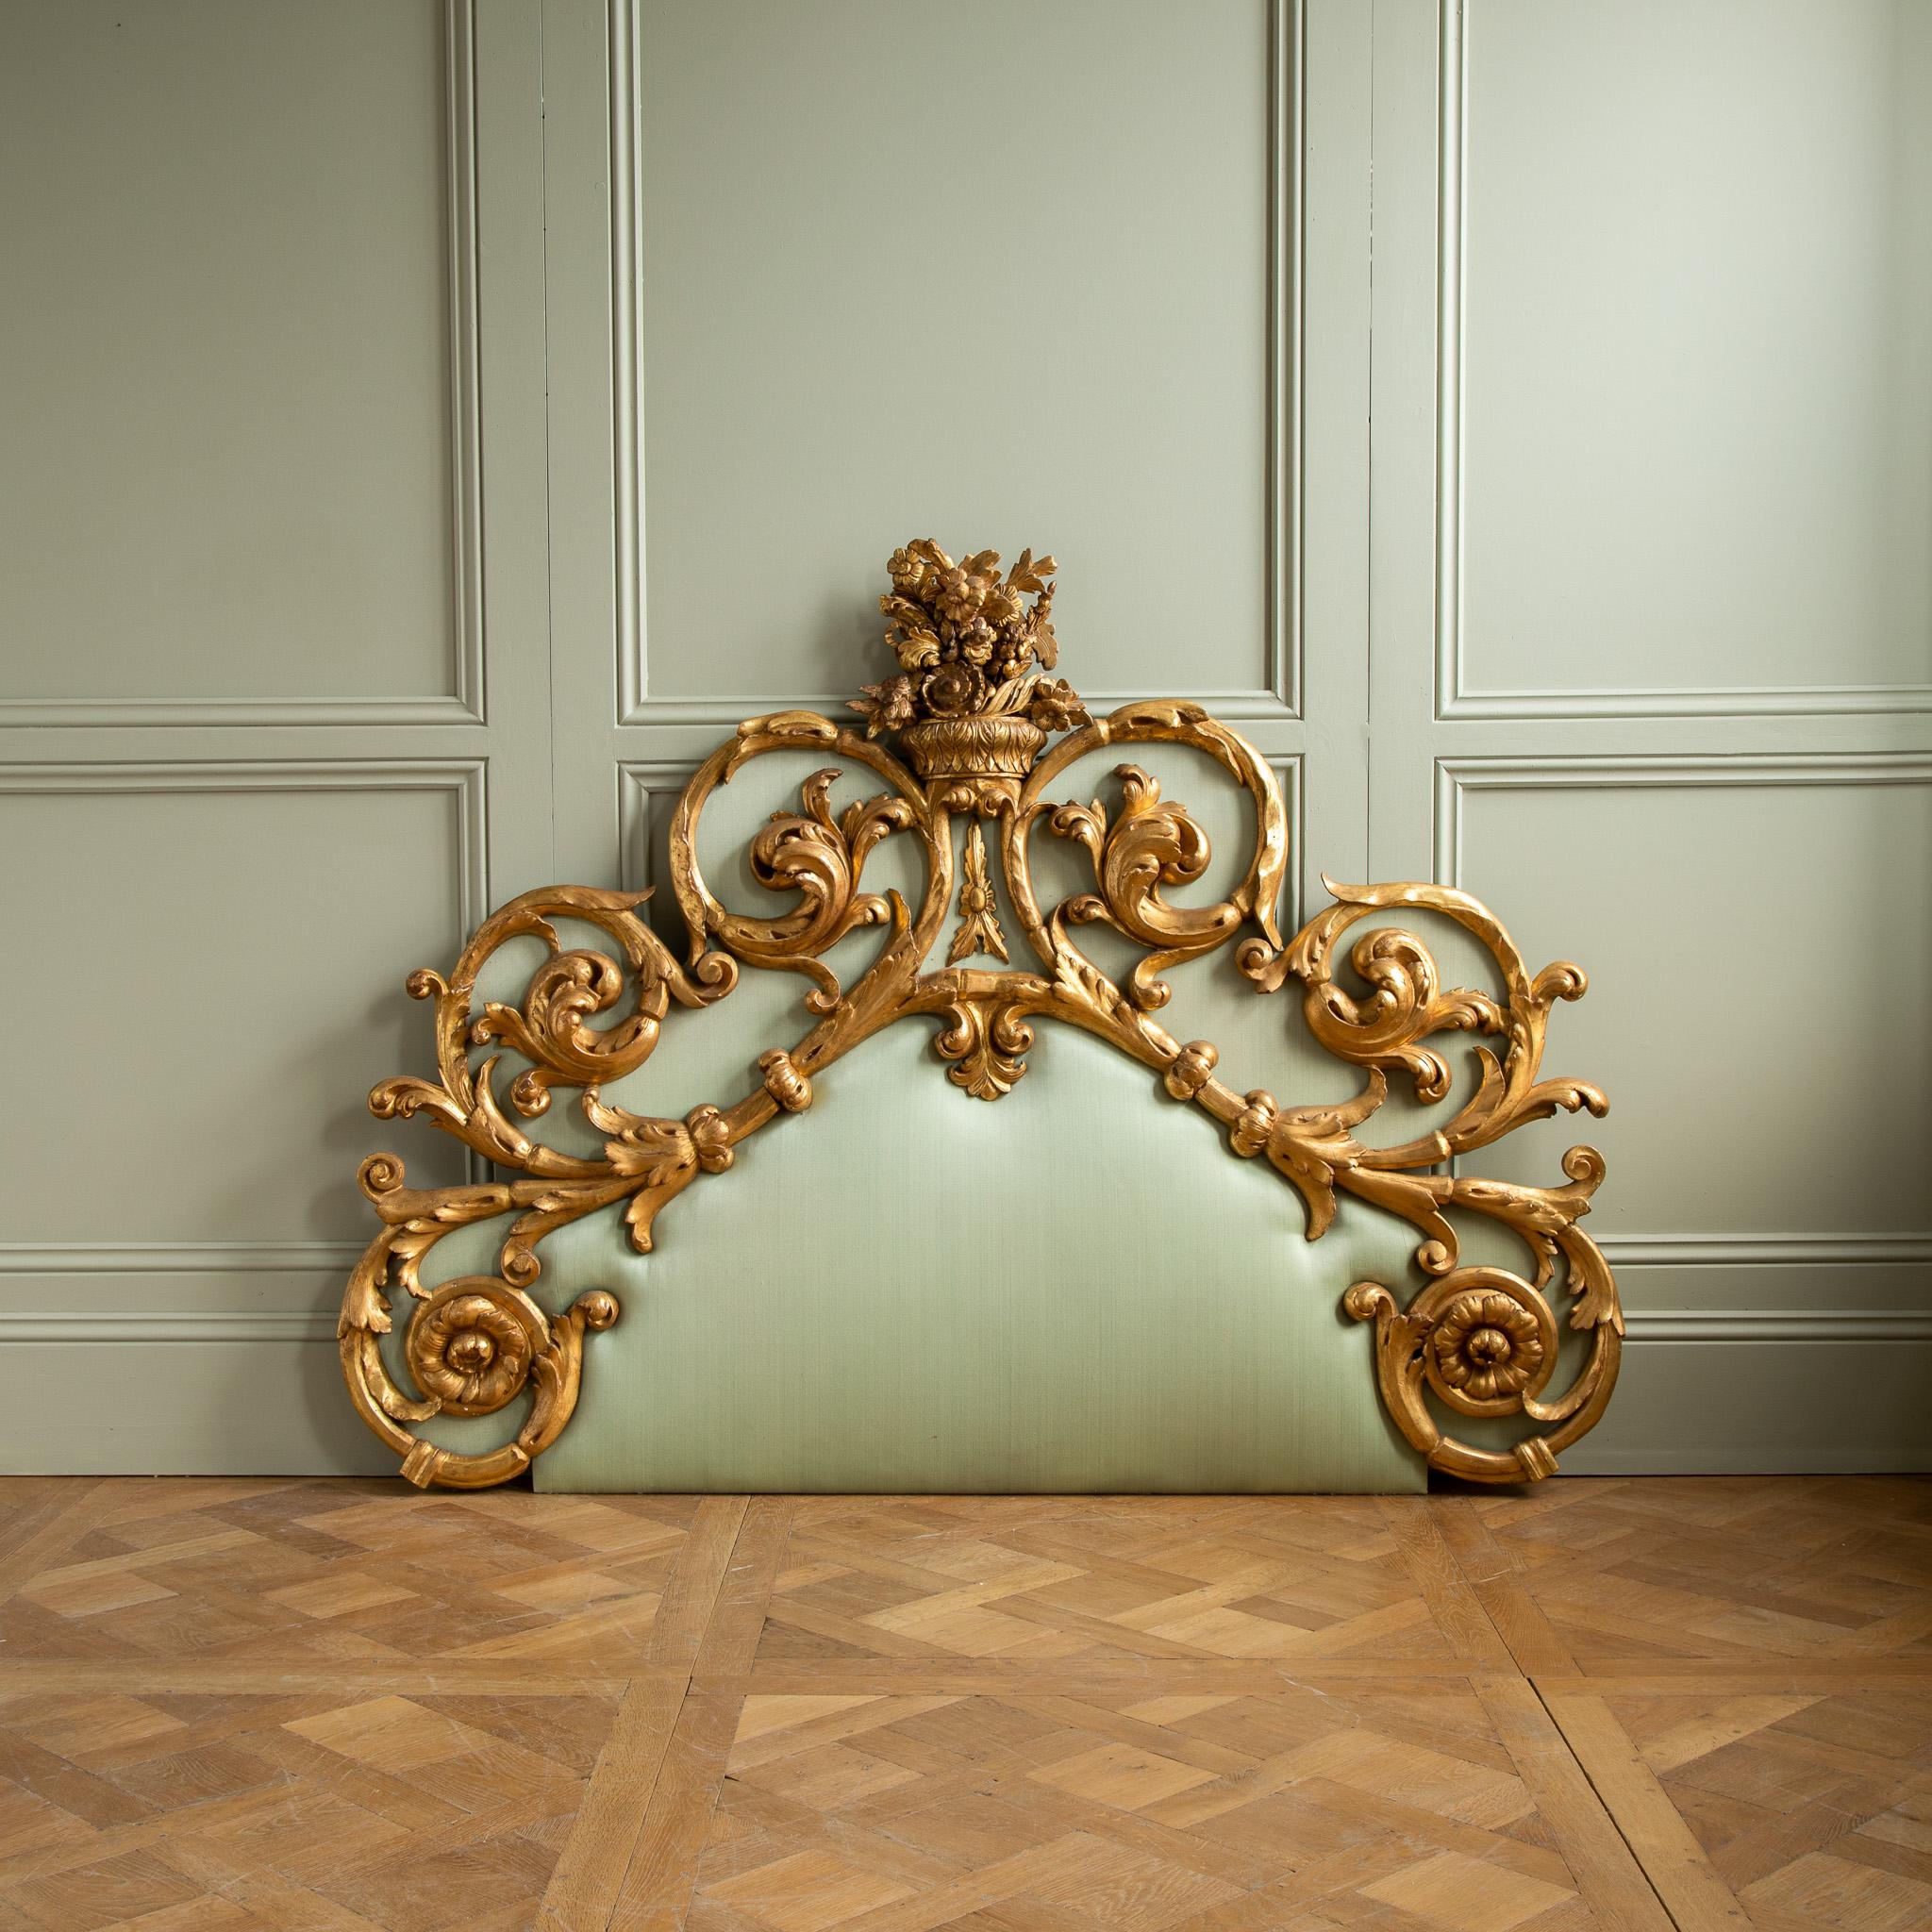 From Italy, European home to master craftsmen, we have an original 19th century Venetian Headboard made originally for a grand Palazzo. The Rococo design of the frame is made of large, inward curving spirals which finish as stylised, acanthus